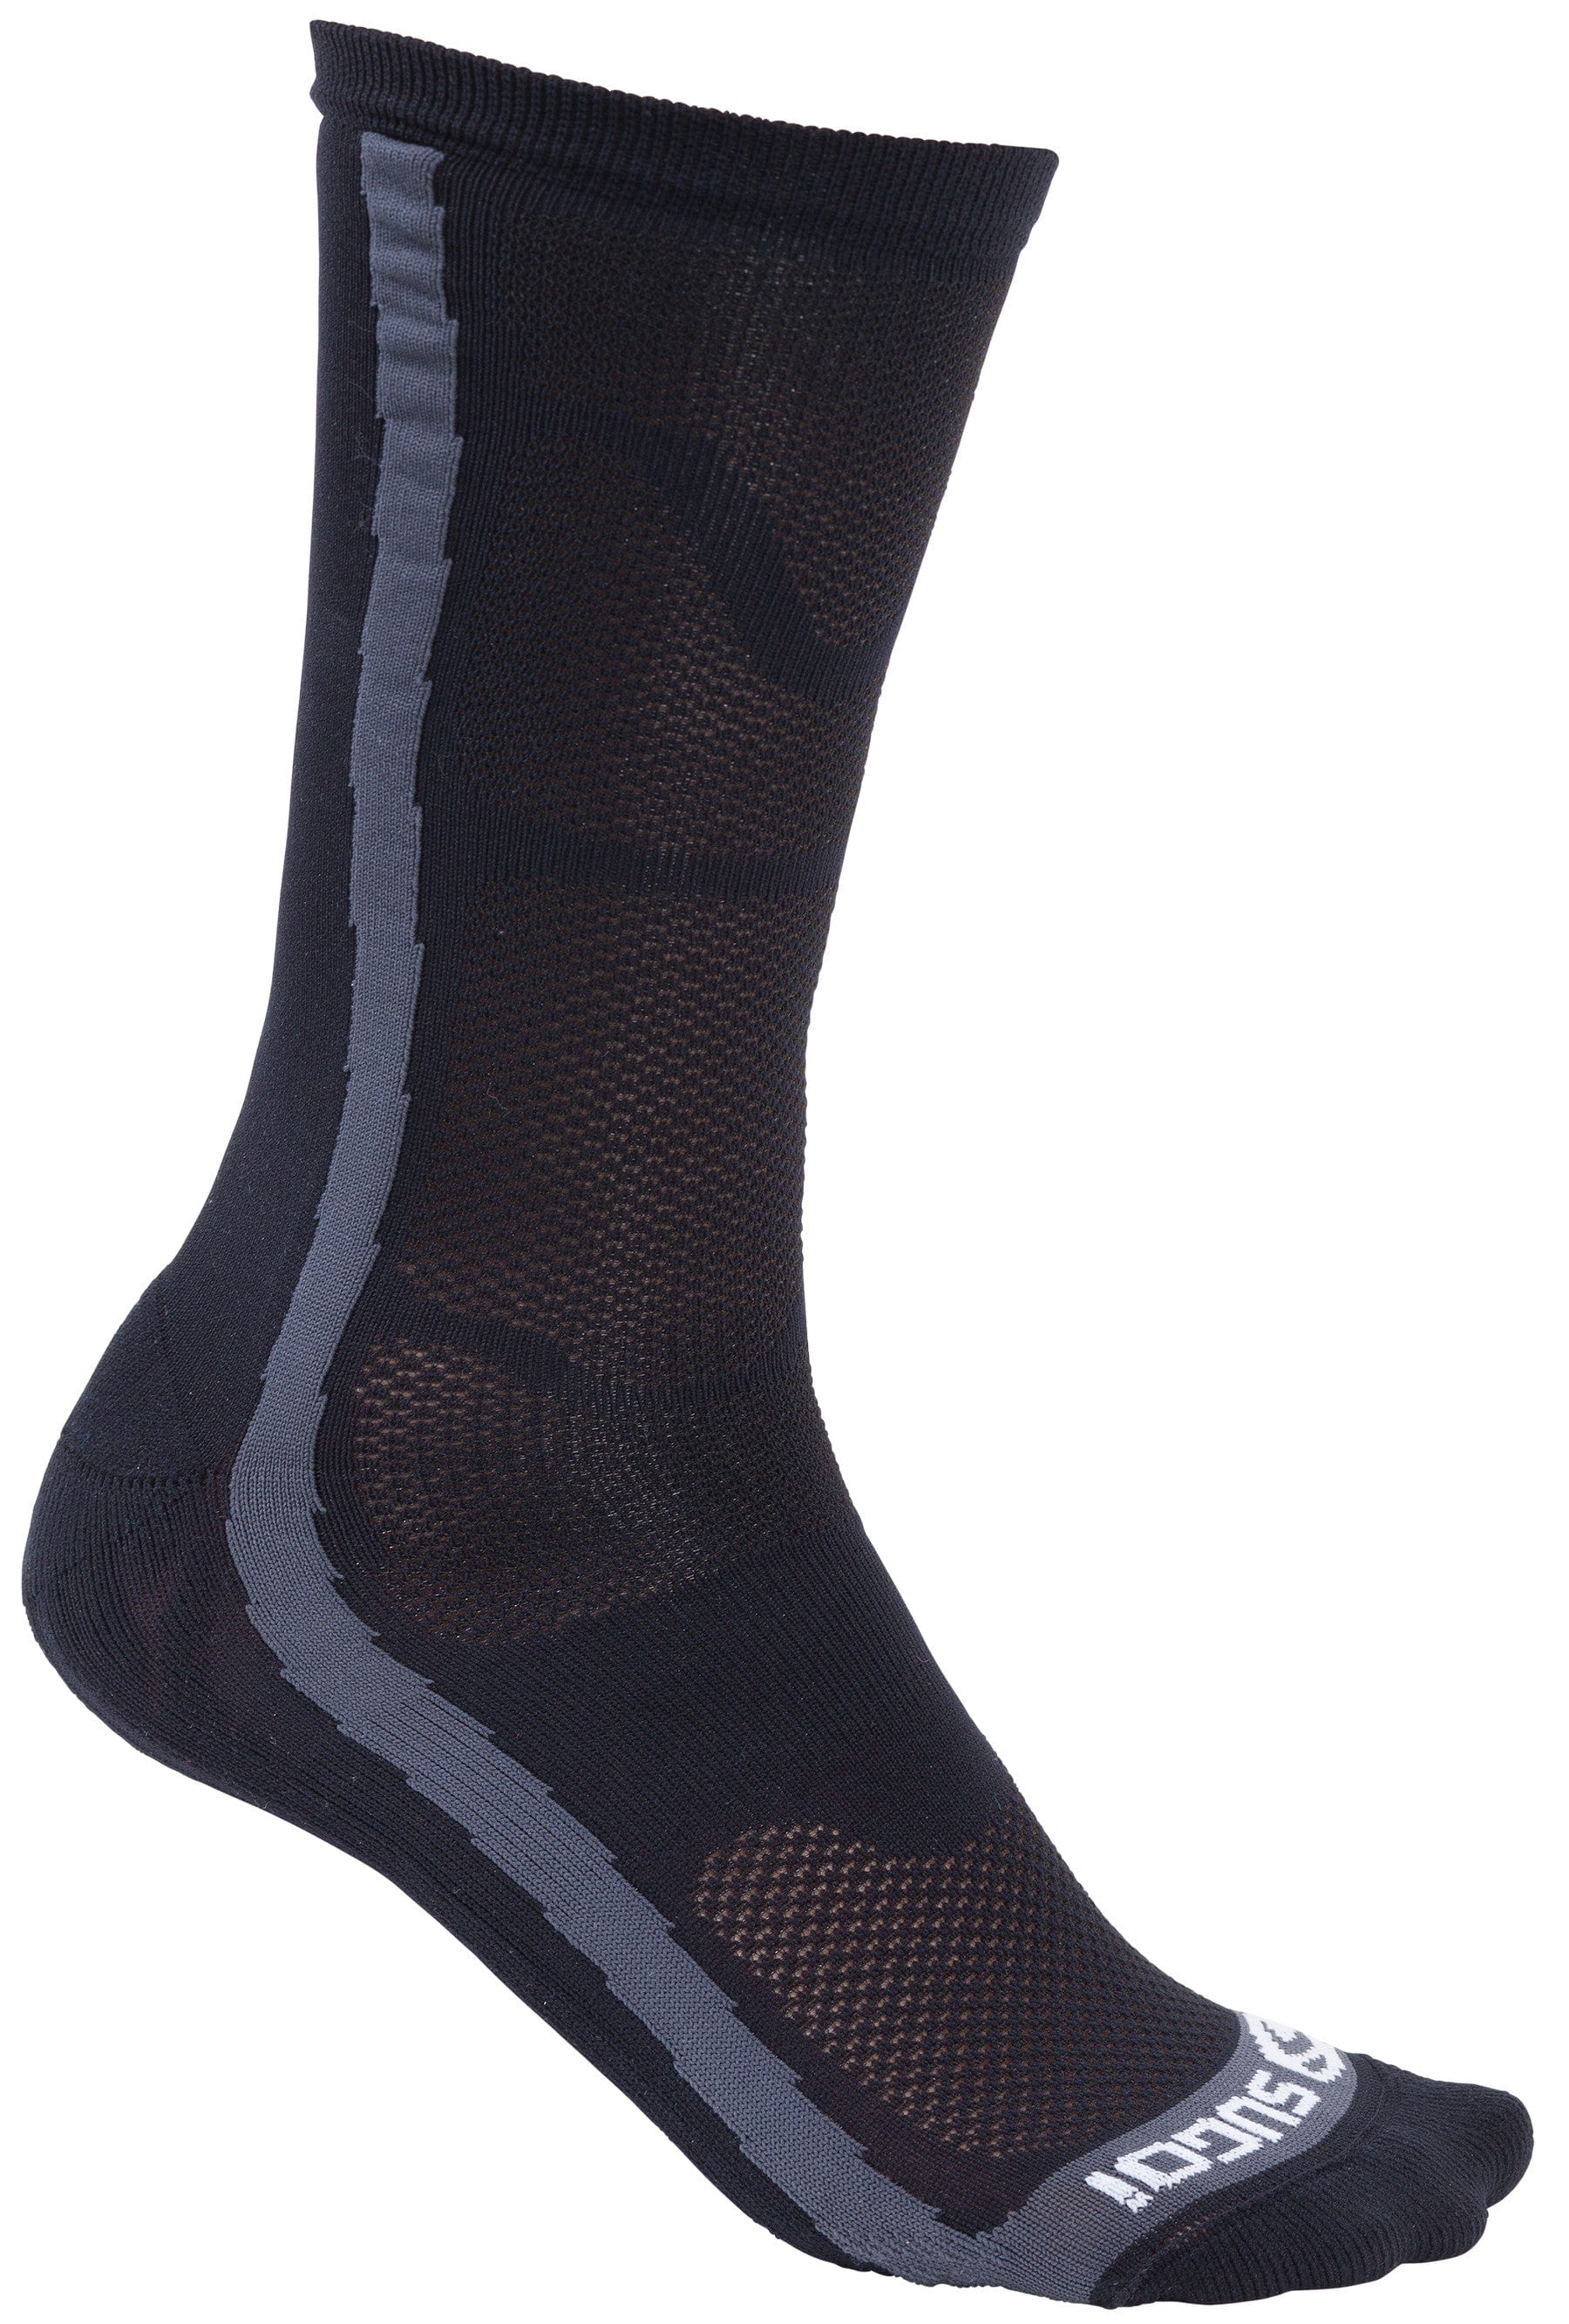 Cycle Tribe Product Sizes Black / S Sugoi RS Crew Cycling Socks